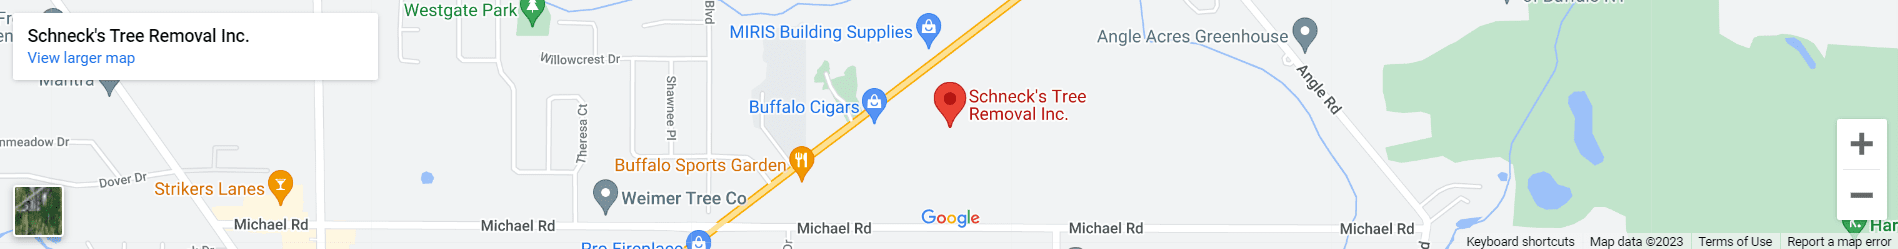 Schneck's Tree Removal Inc